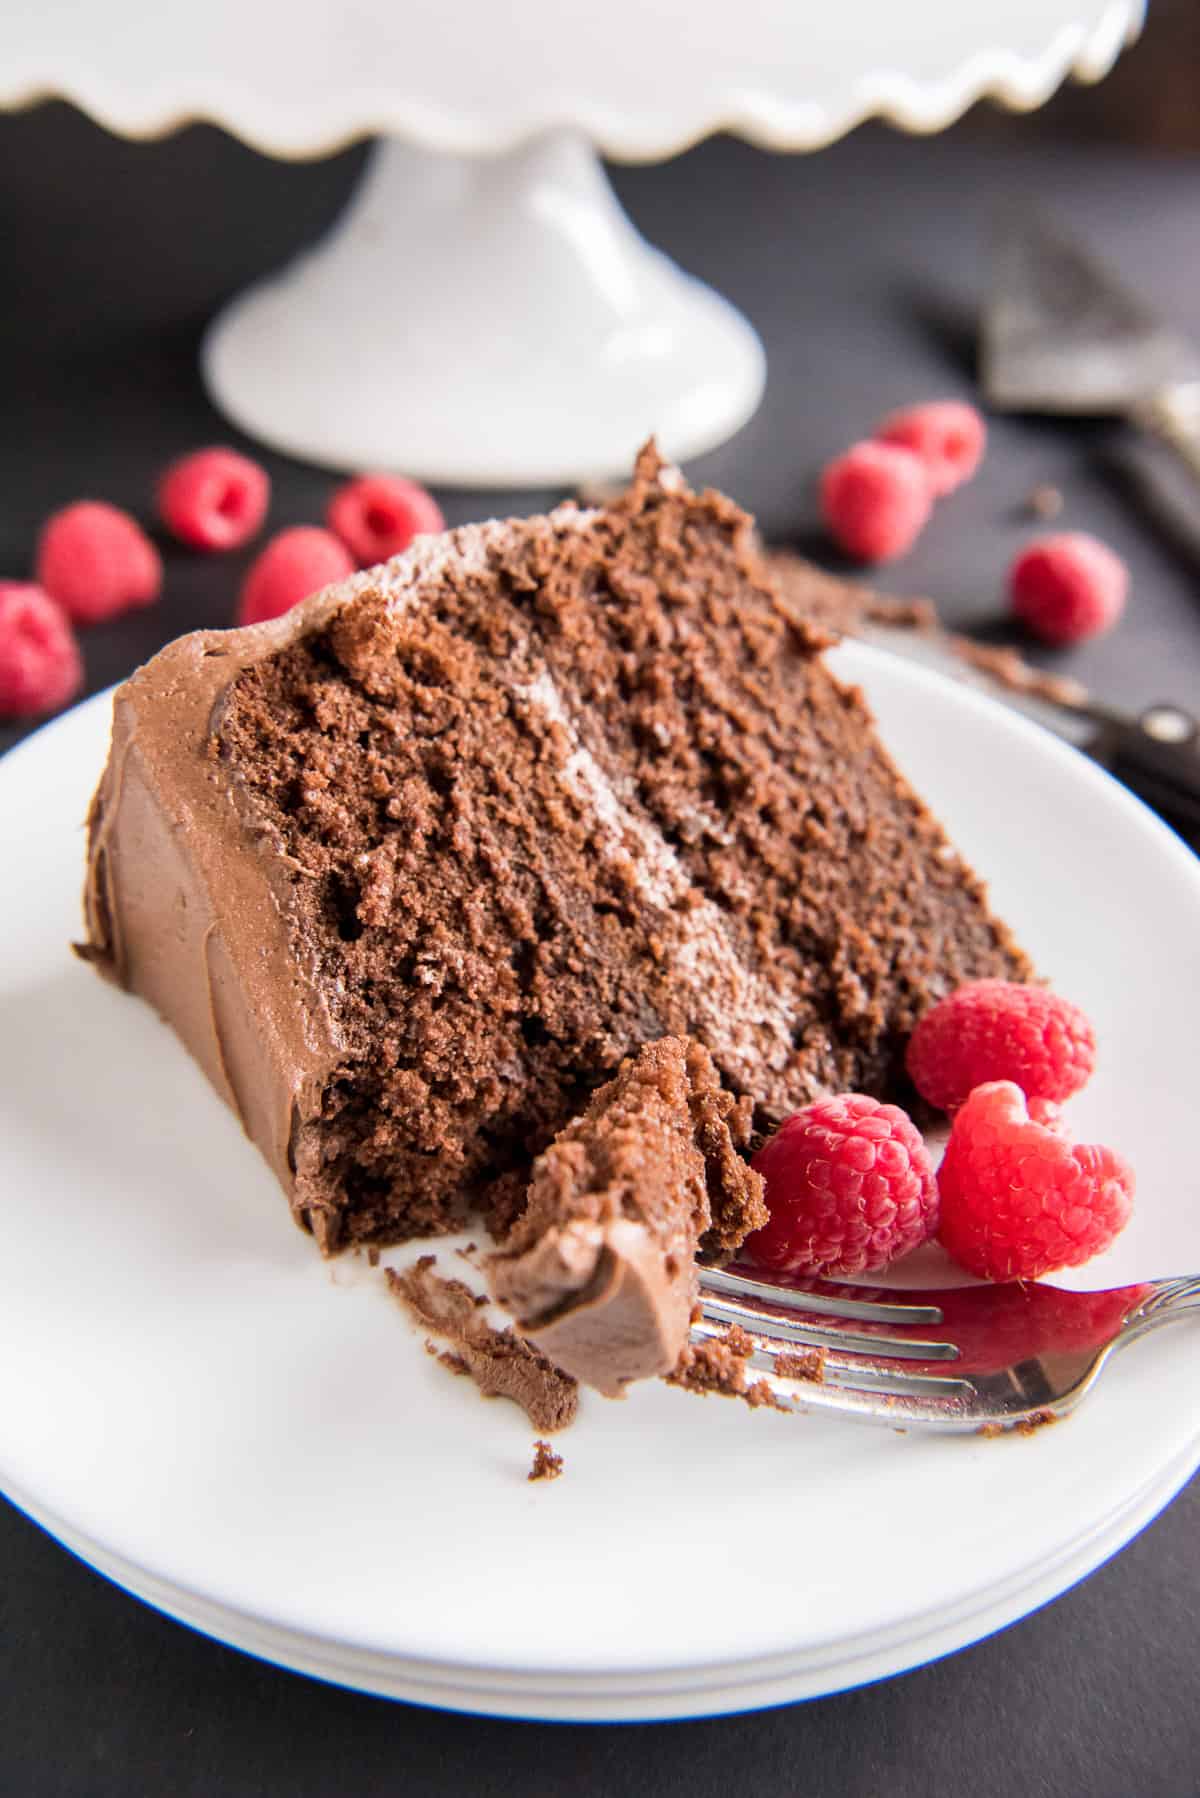 A slice of chocolate cake on a white plate missing a bite and next to fresh raspberries.